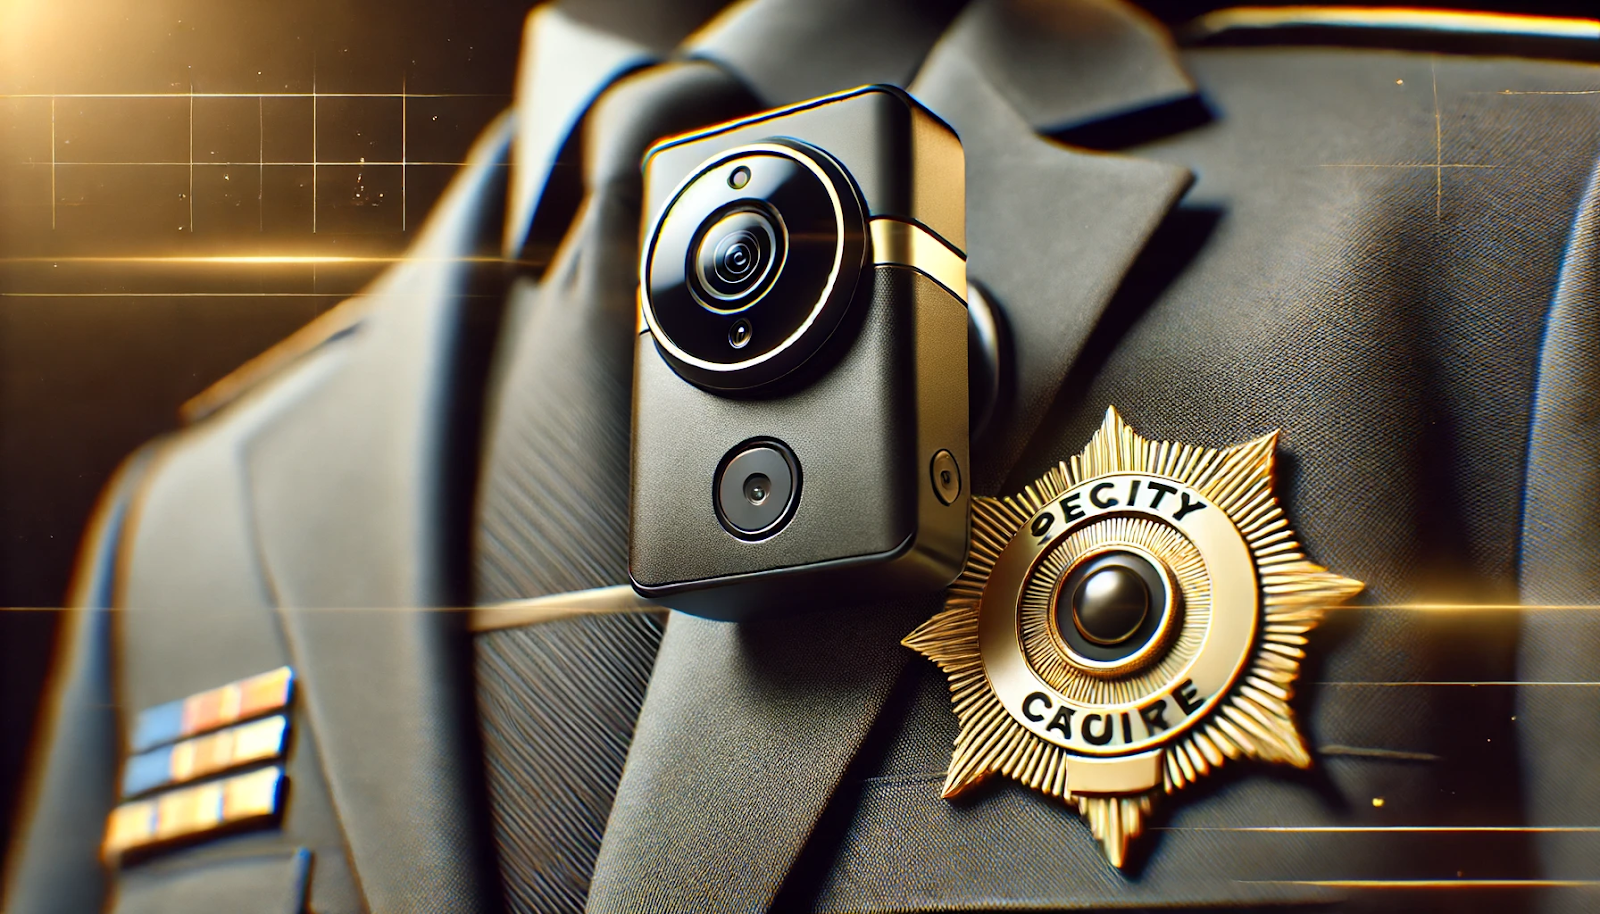  A symbolic representation of body-worn cameras for security personnel, featuring a black and gold color scheme.  